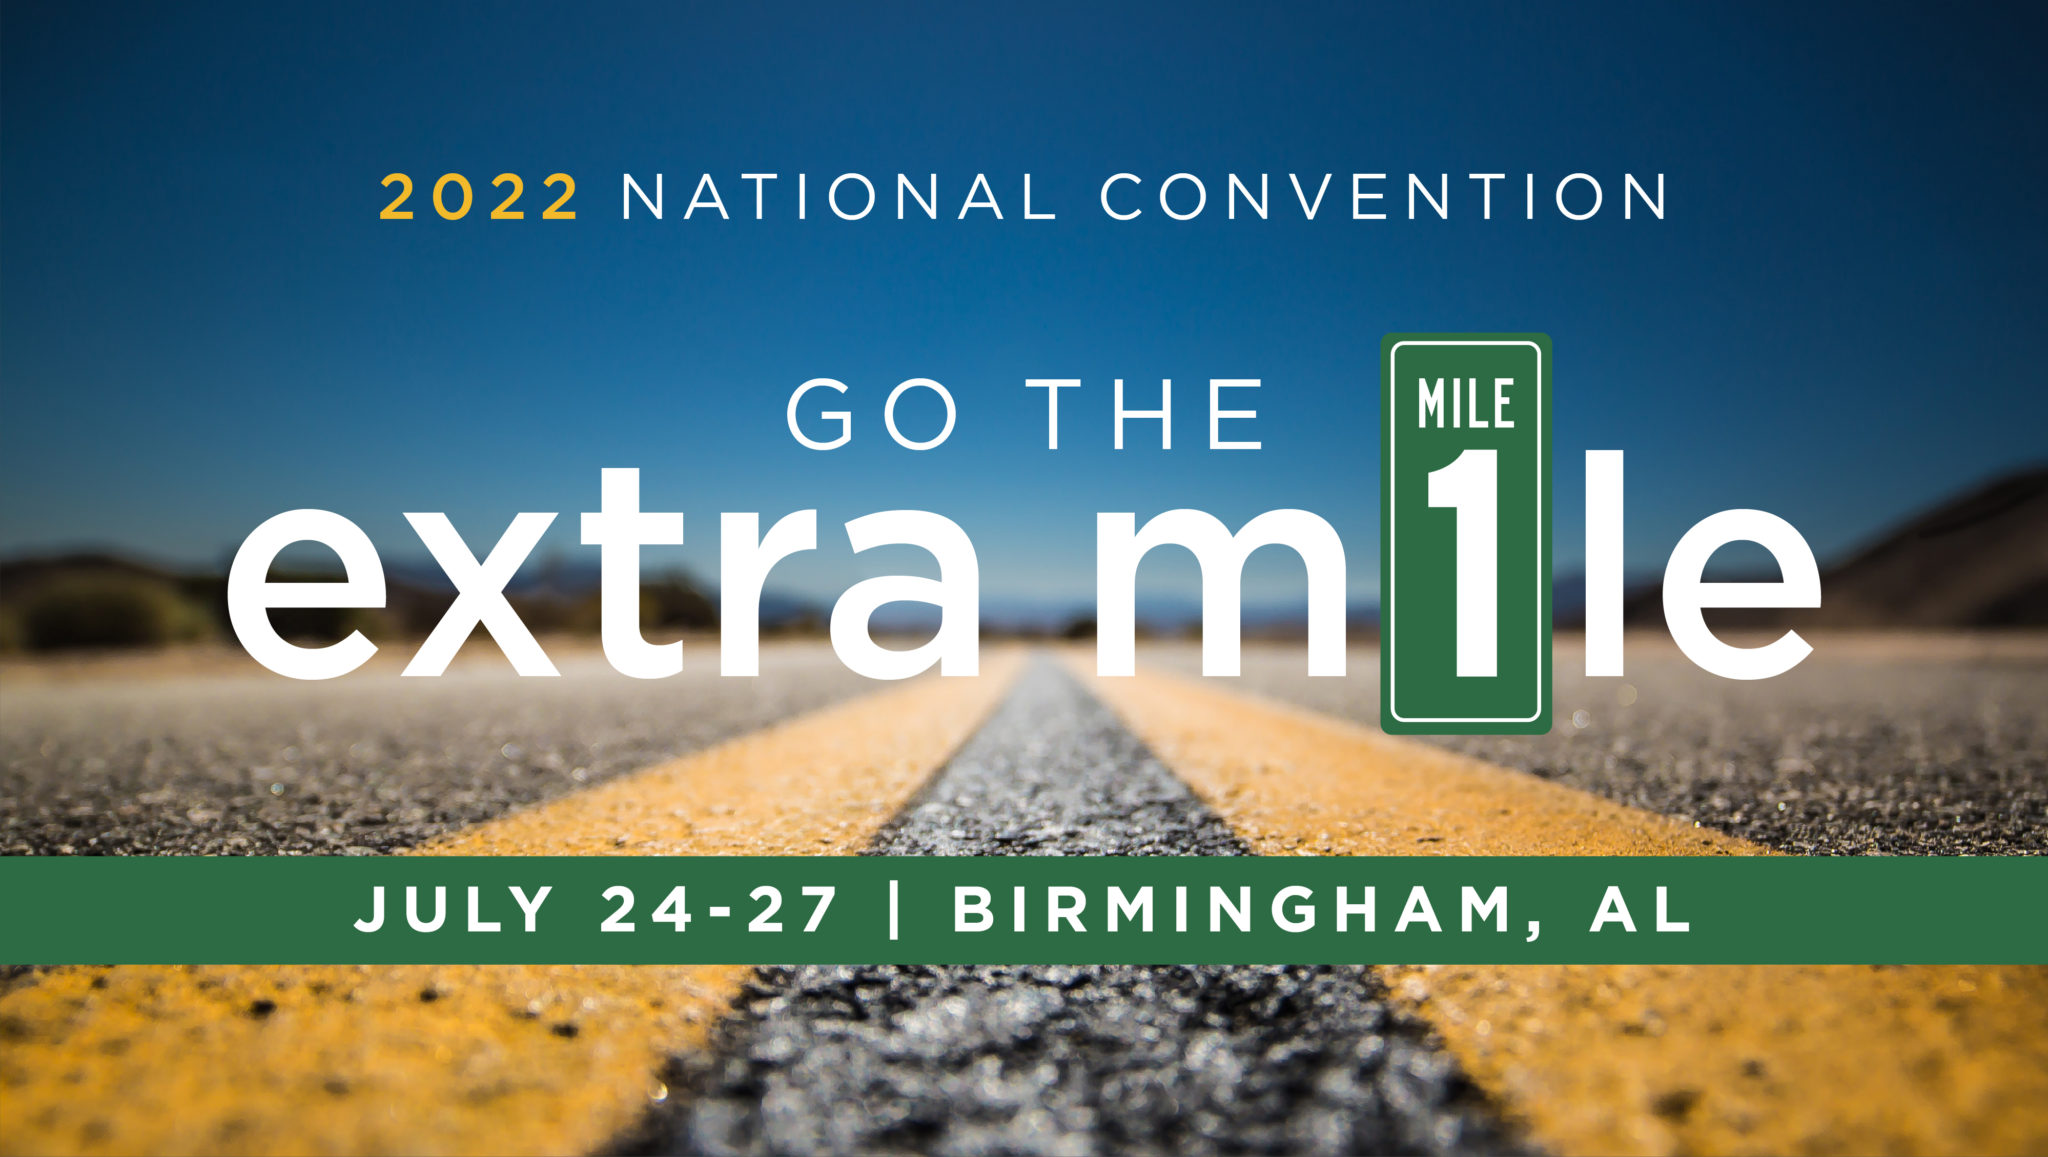 2022 National Convention National Association of Free Will Baptists, Inc